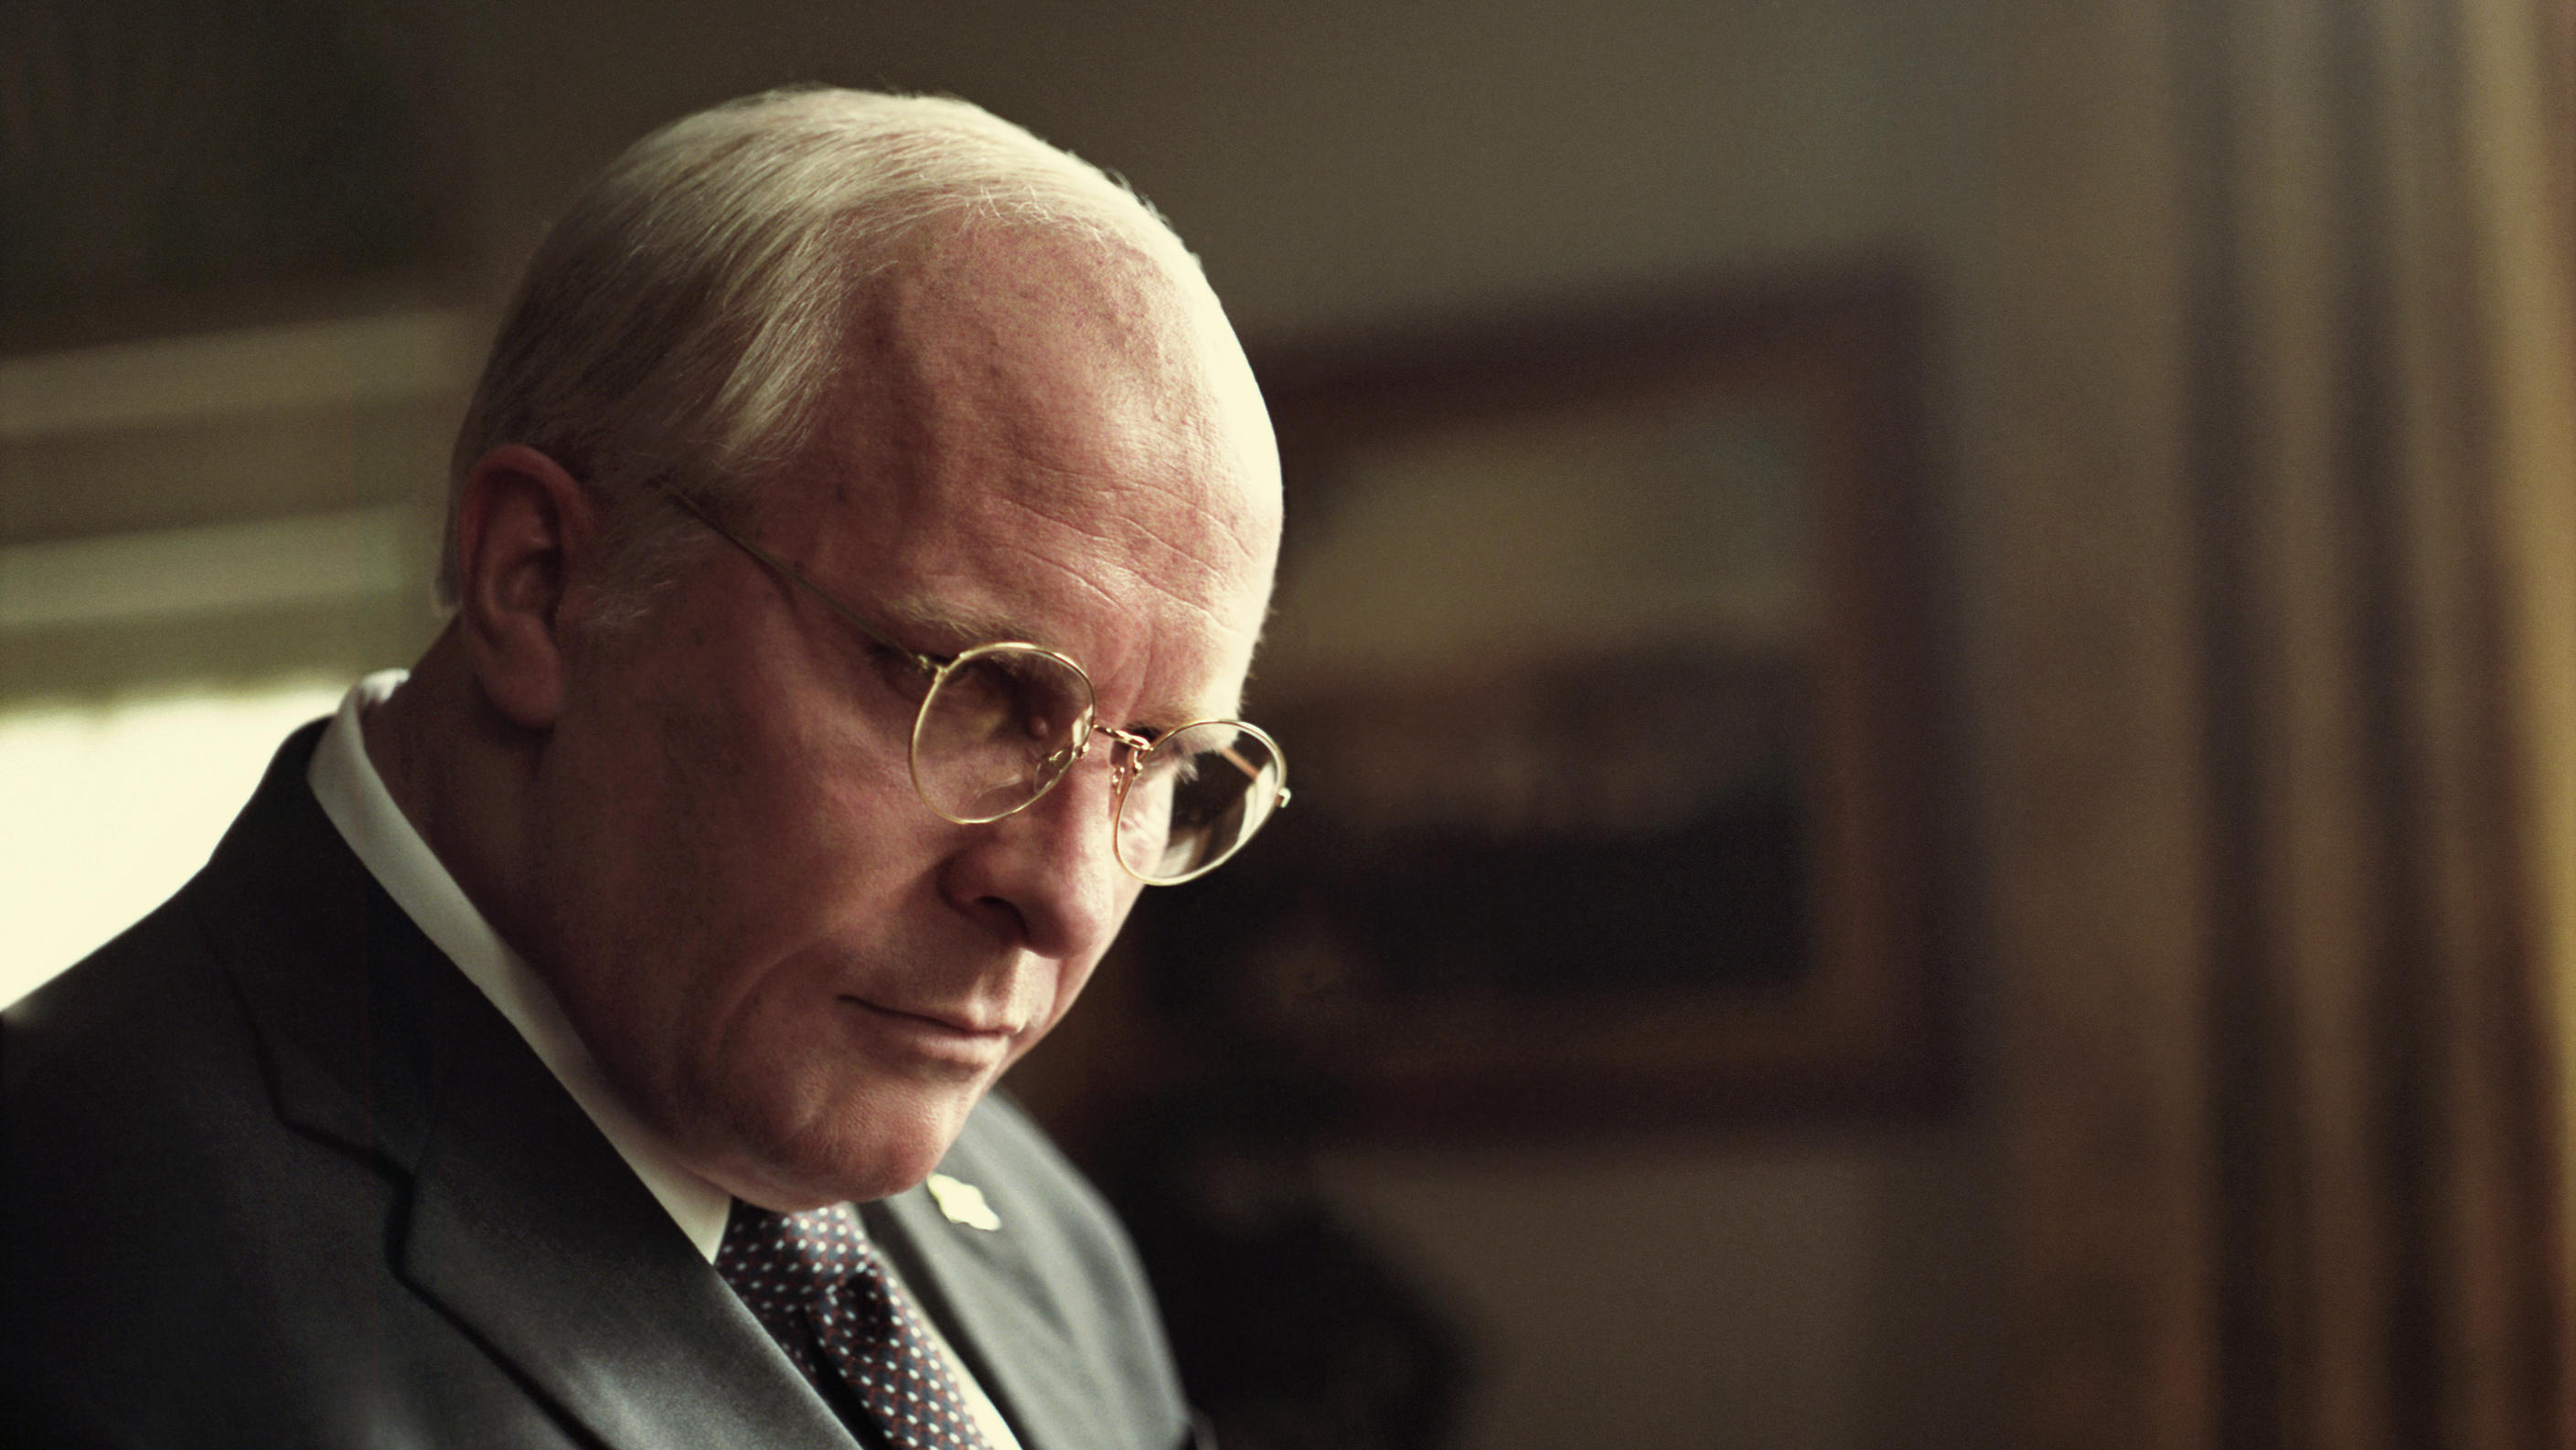 See Bale as Dick Cheney in new trailer for "Vice" -